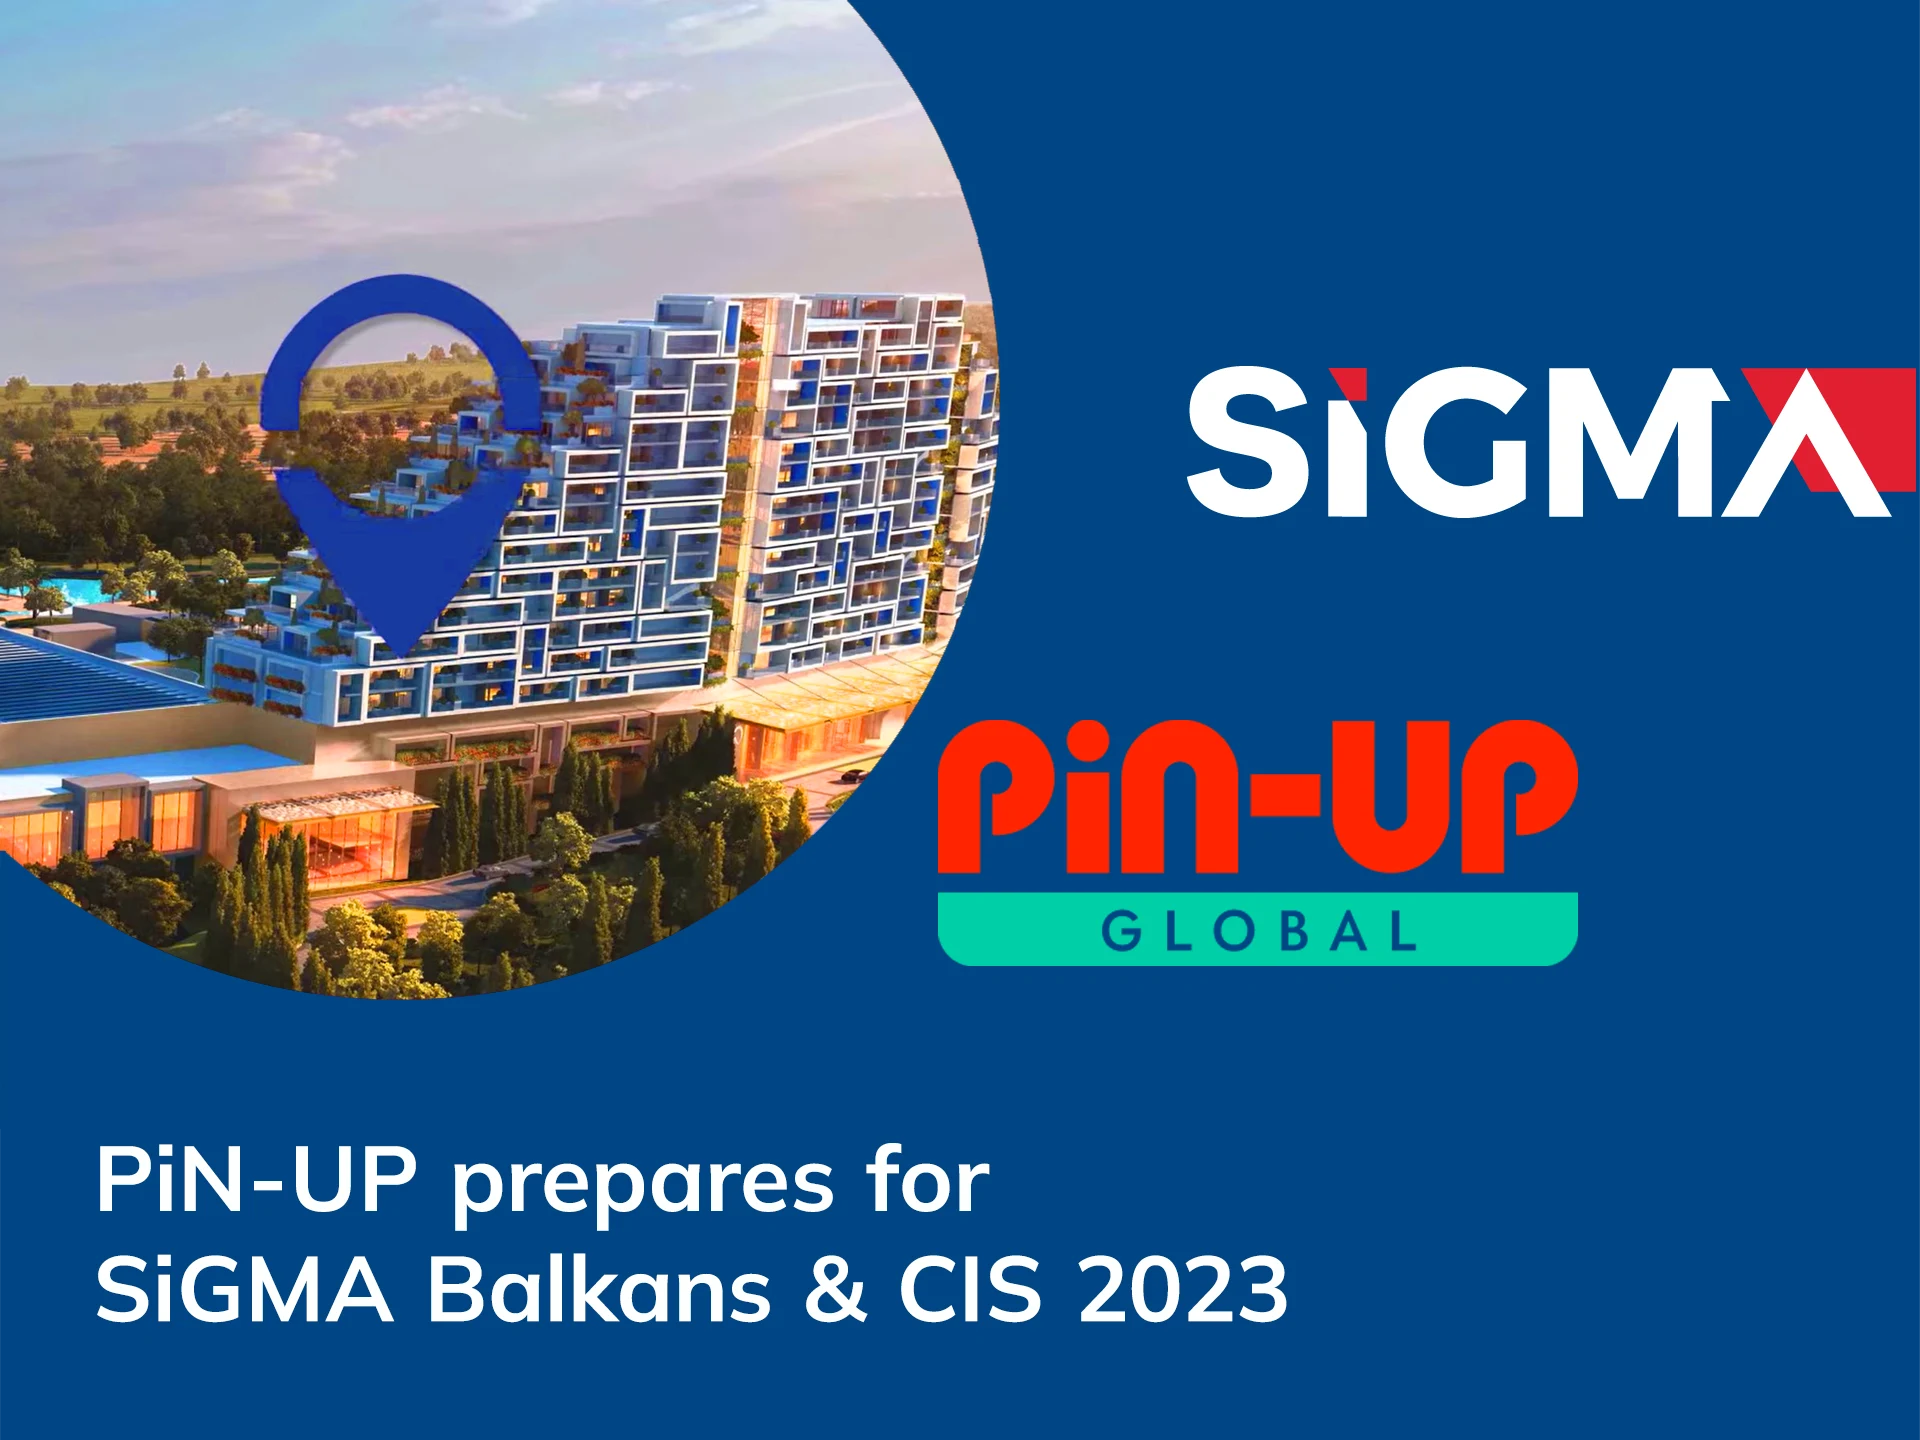 SiGMA Balkans and CIS 2023 conference is aimed at discussing gaming industry trends, sharing experience and expanding partnerships.